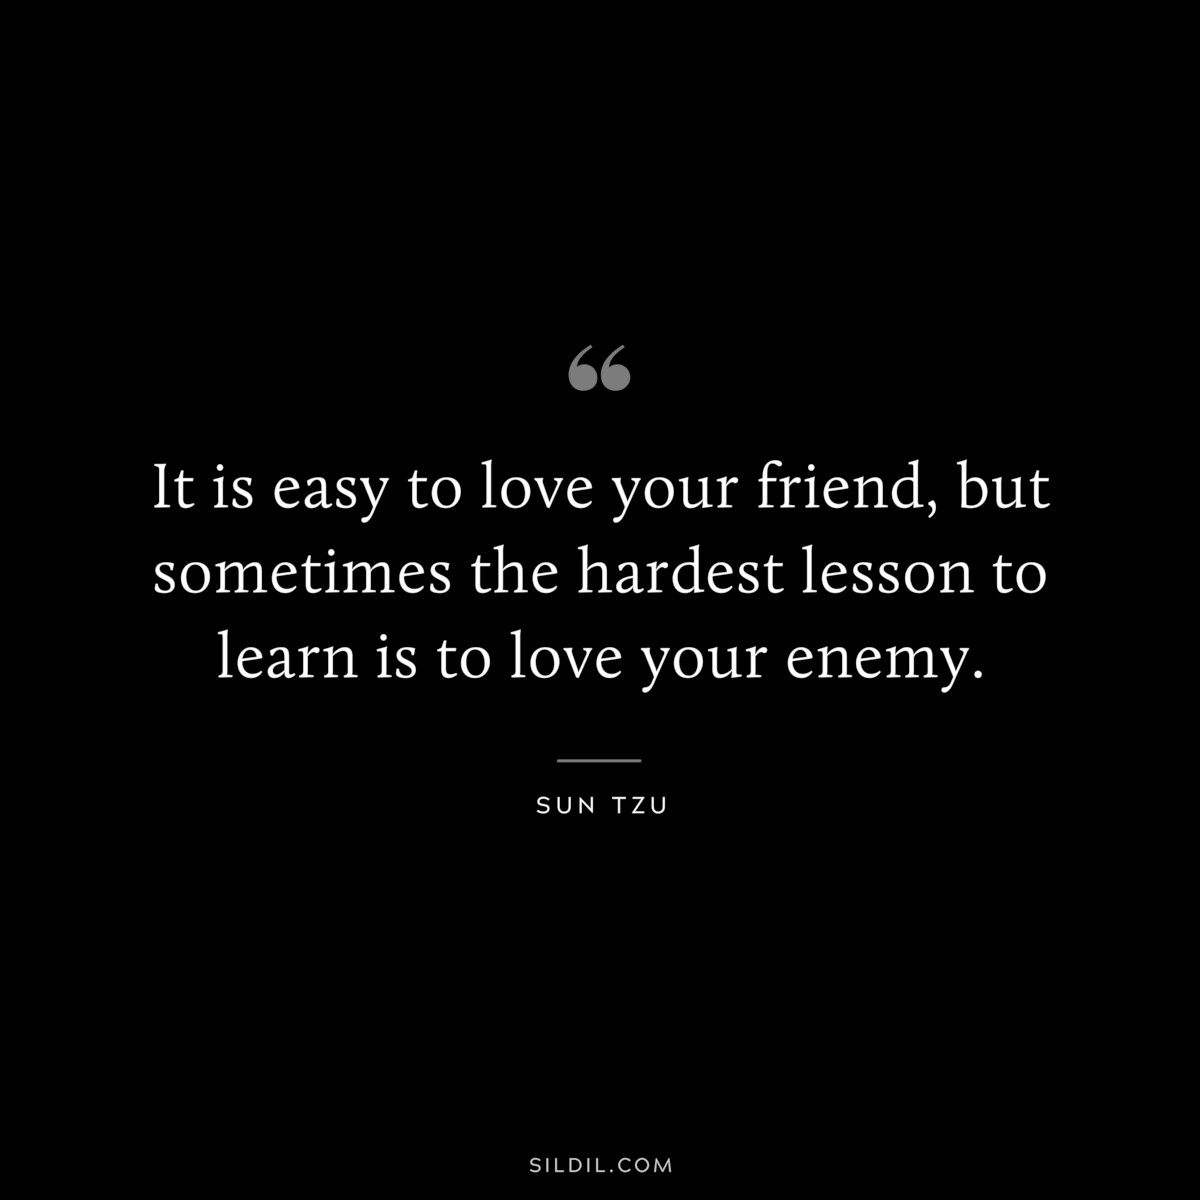 It is easy to love your friend, but sometimes the hardest lesson to learn is to love your enemy.― Sun Tzu